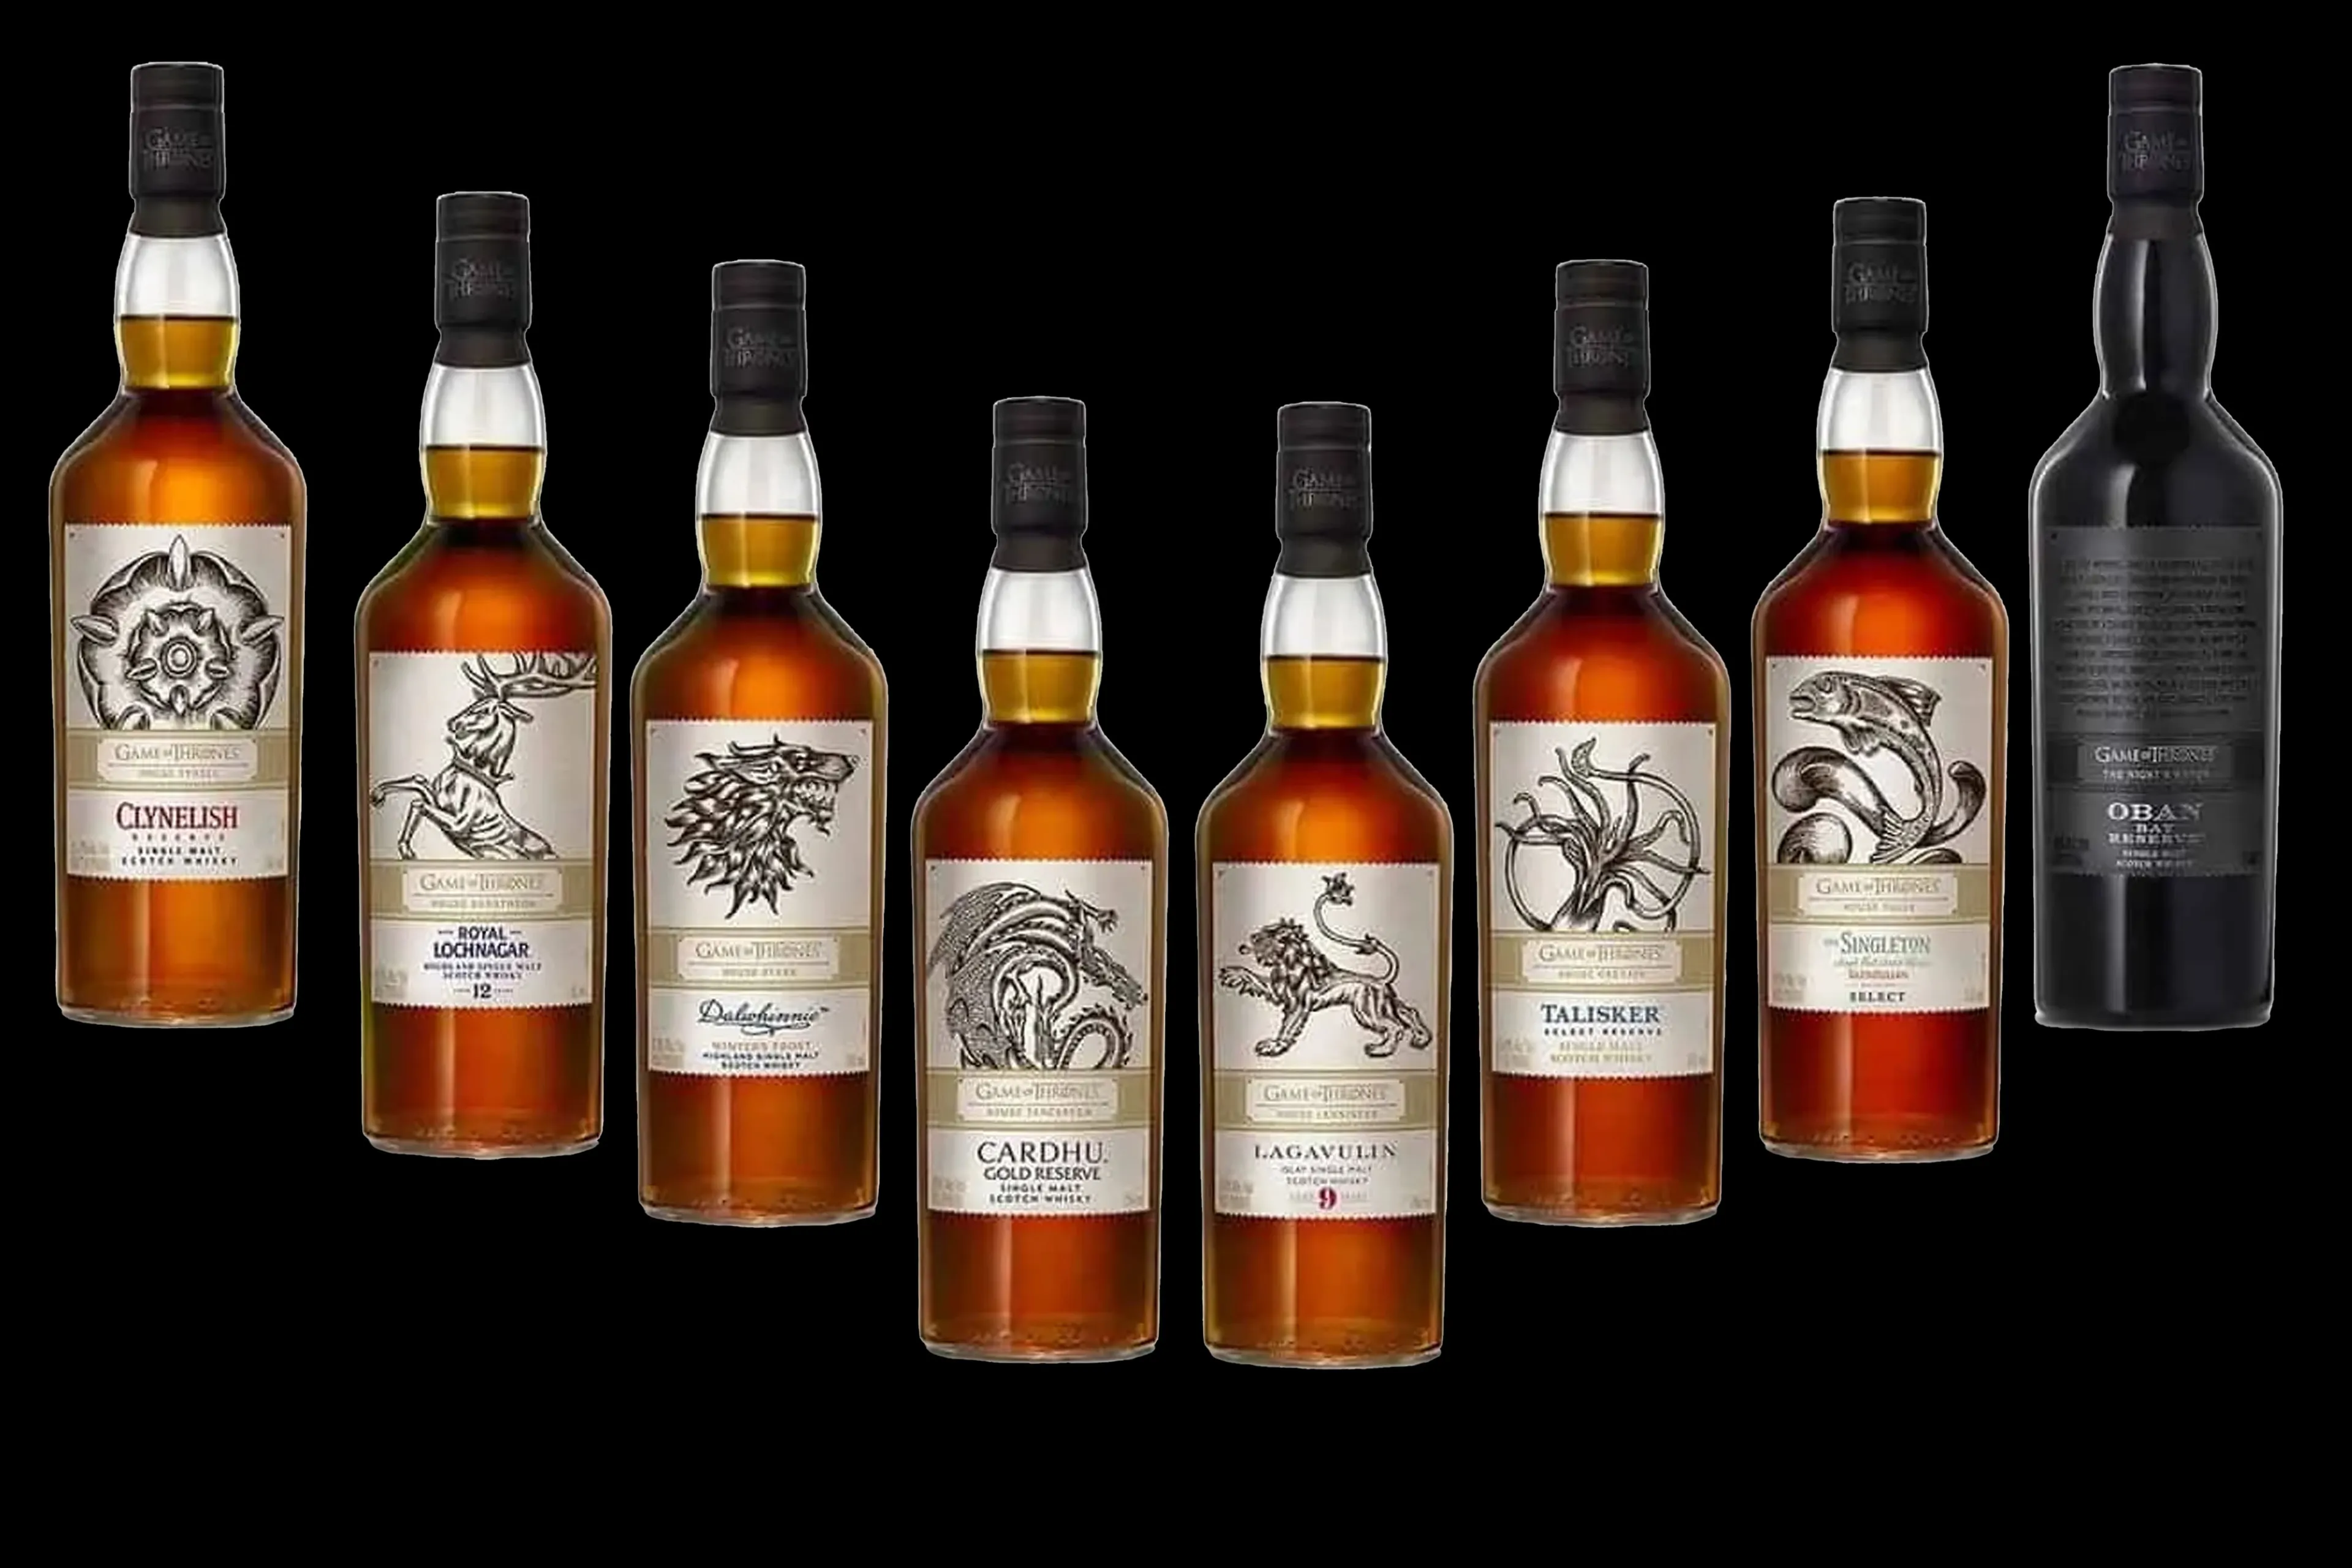 De Game of Thrones Ultimate Collection whisky's